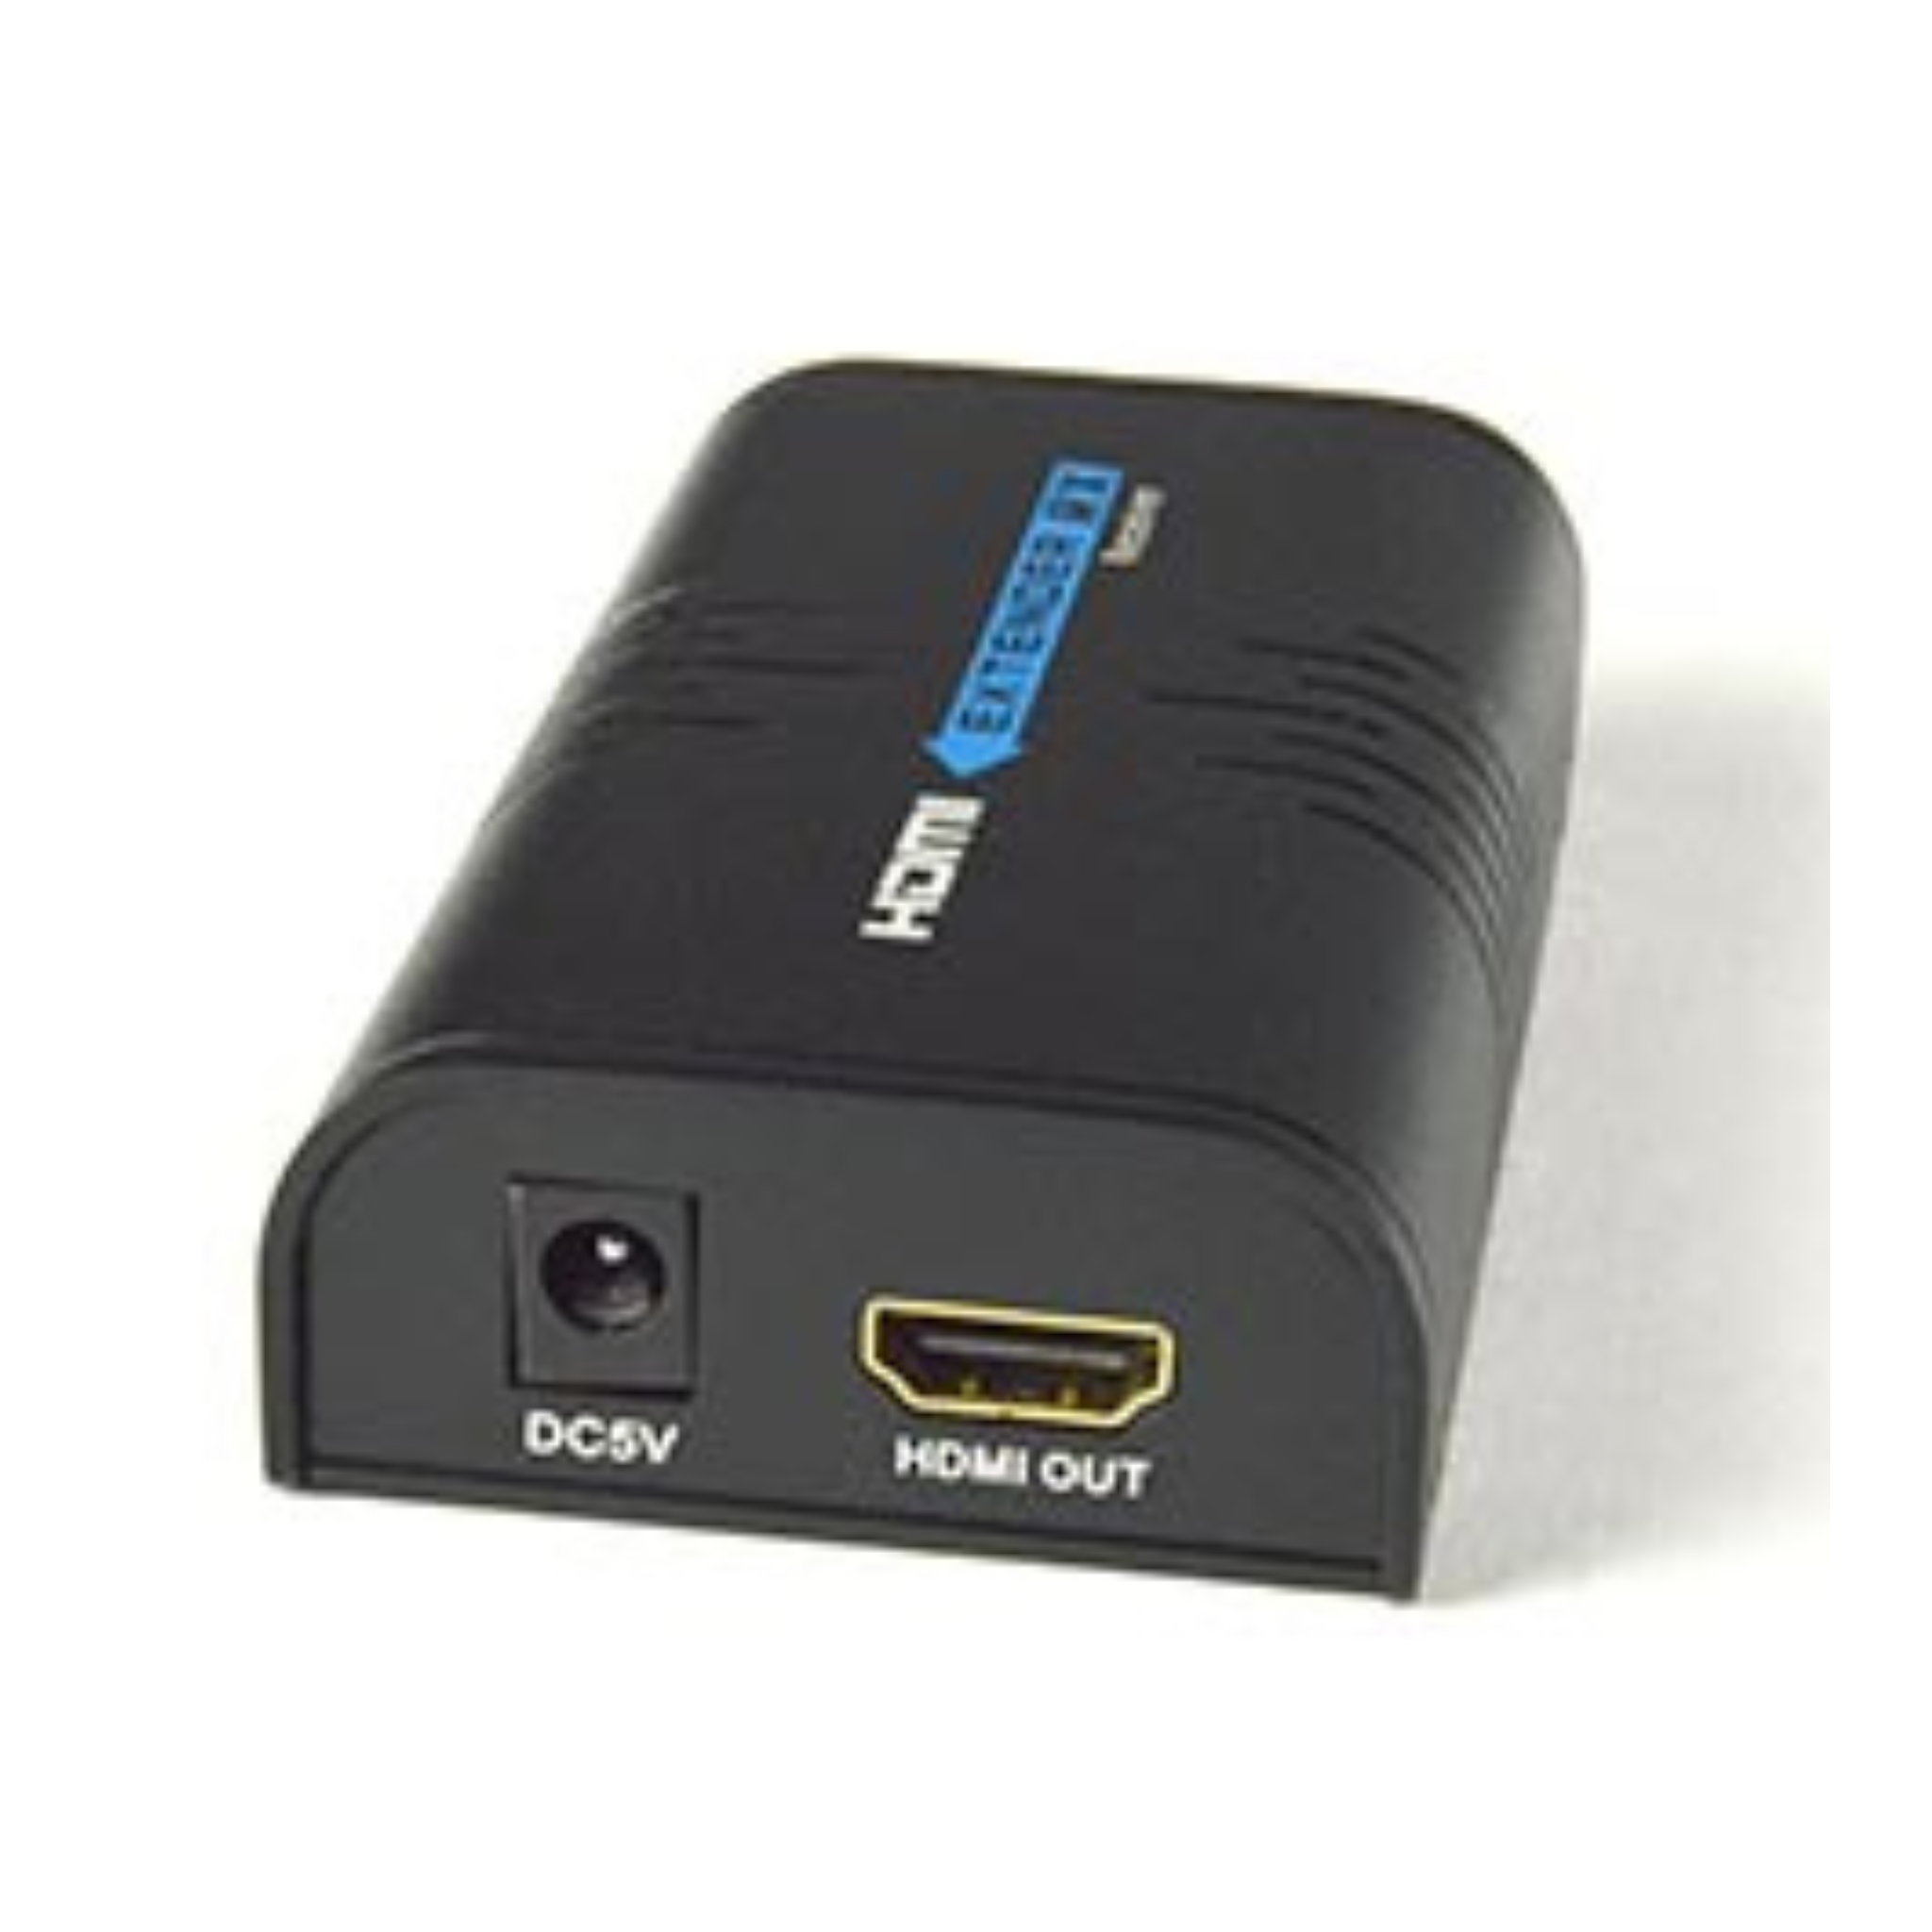 HDMI Over Gigabit IP Network Range Extender Receiver Connected with CAT6/6a/7 cable. Includes Receiver Only